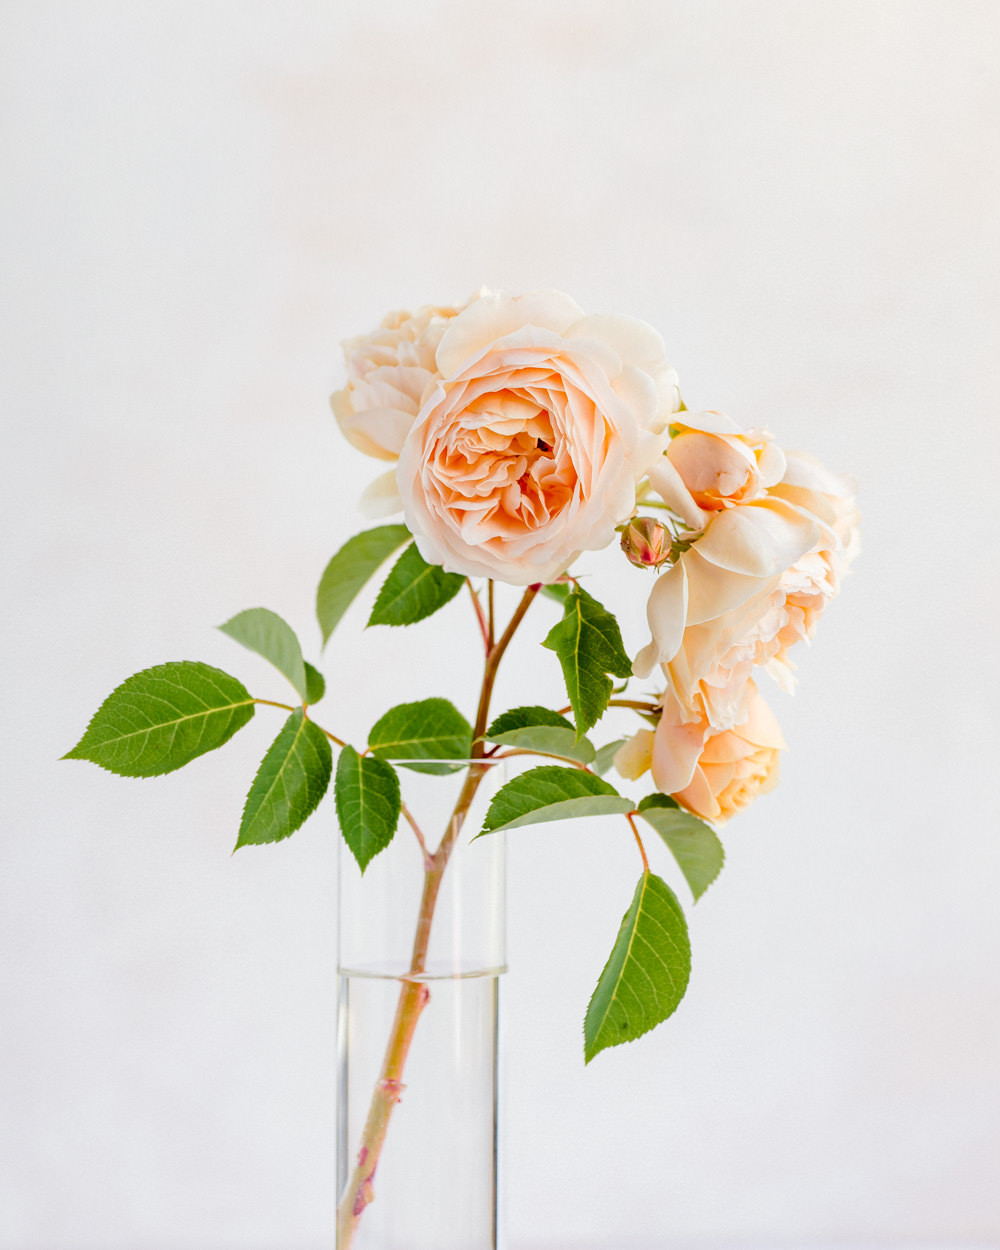 Flower Photography - Roses